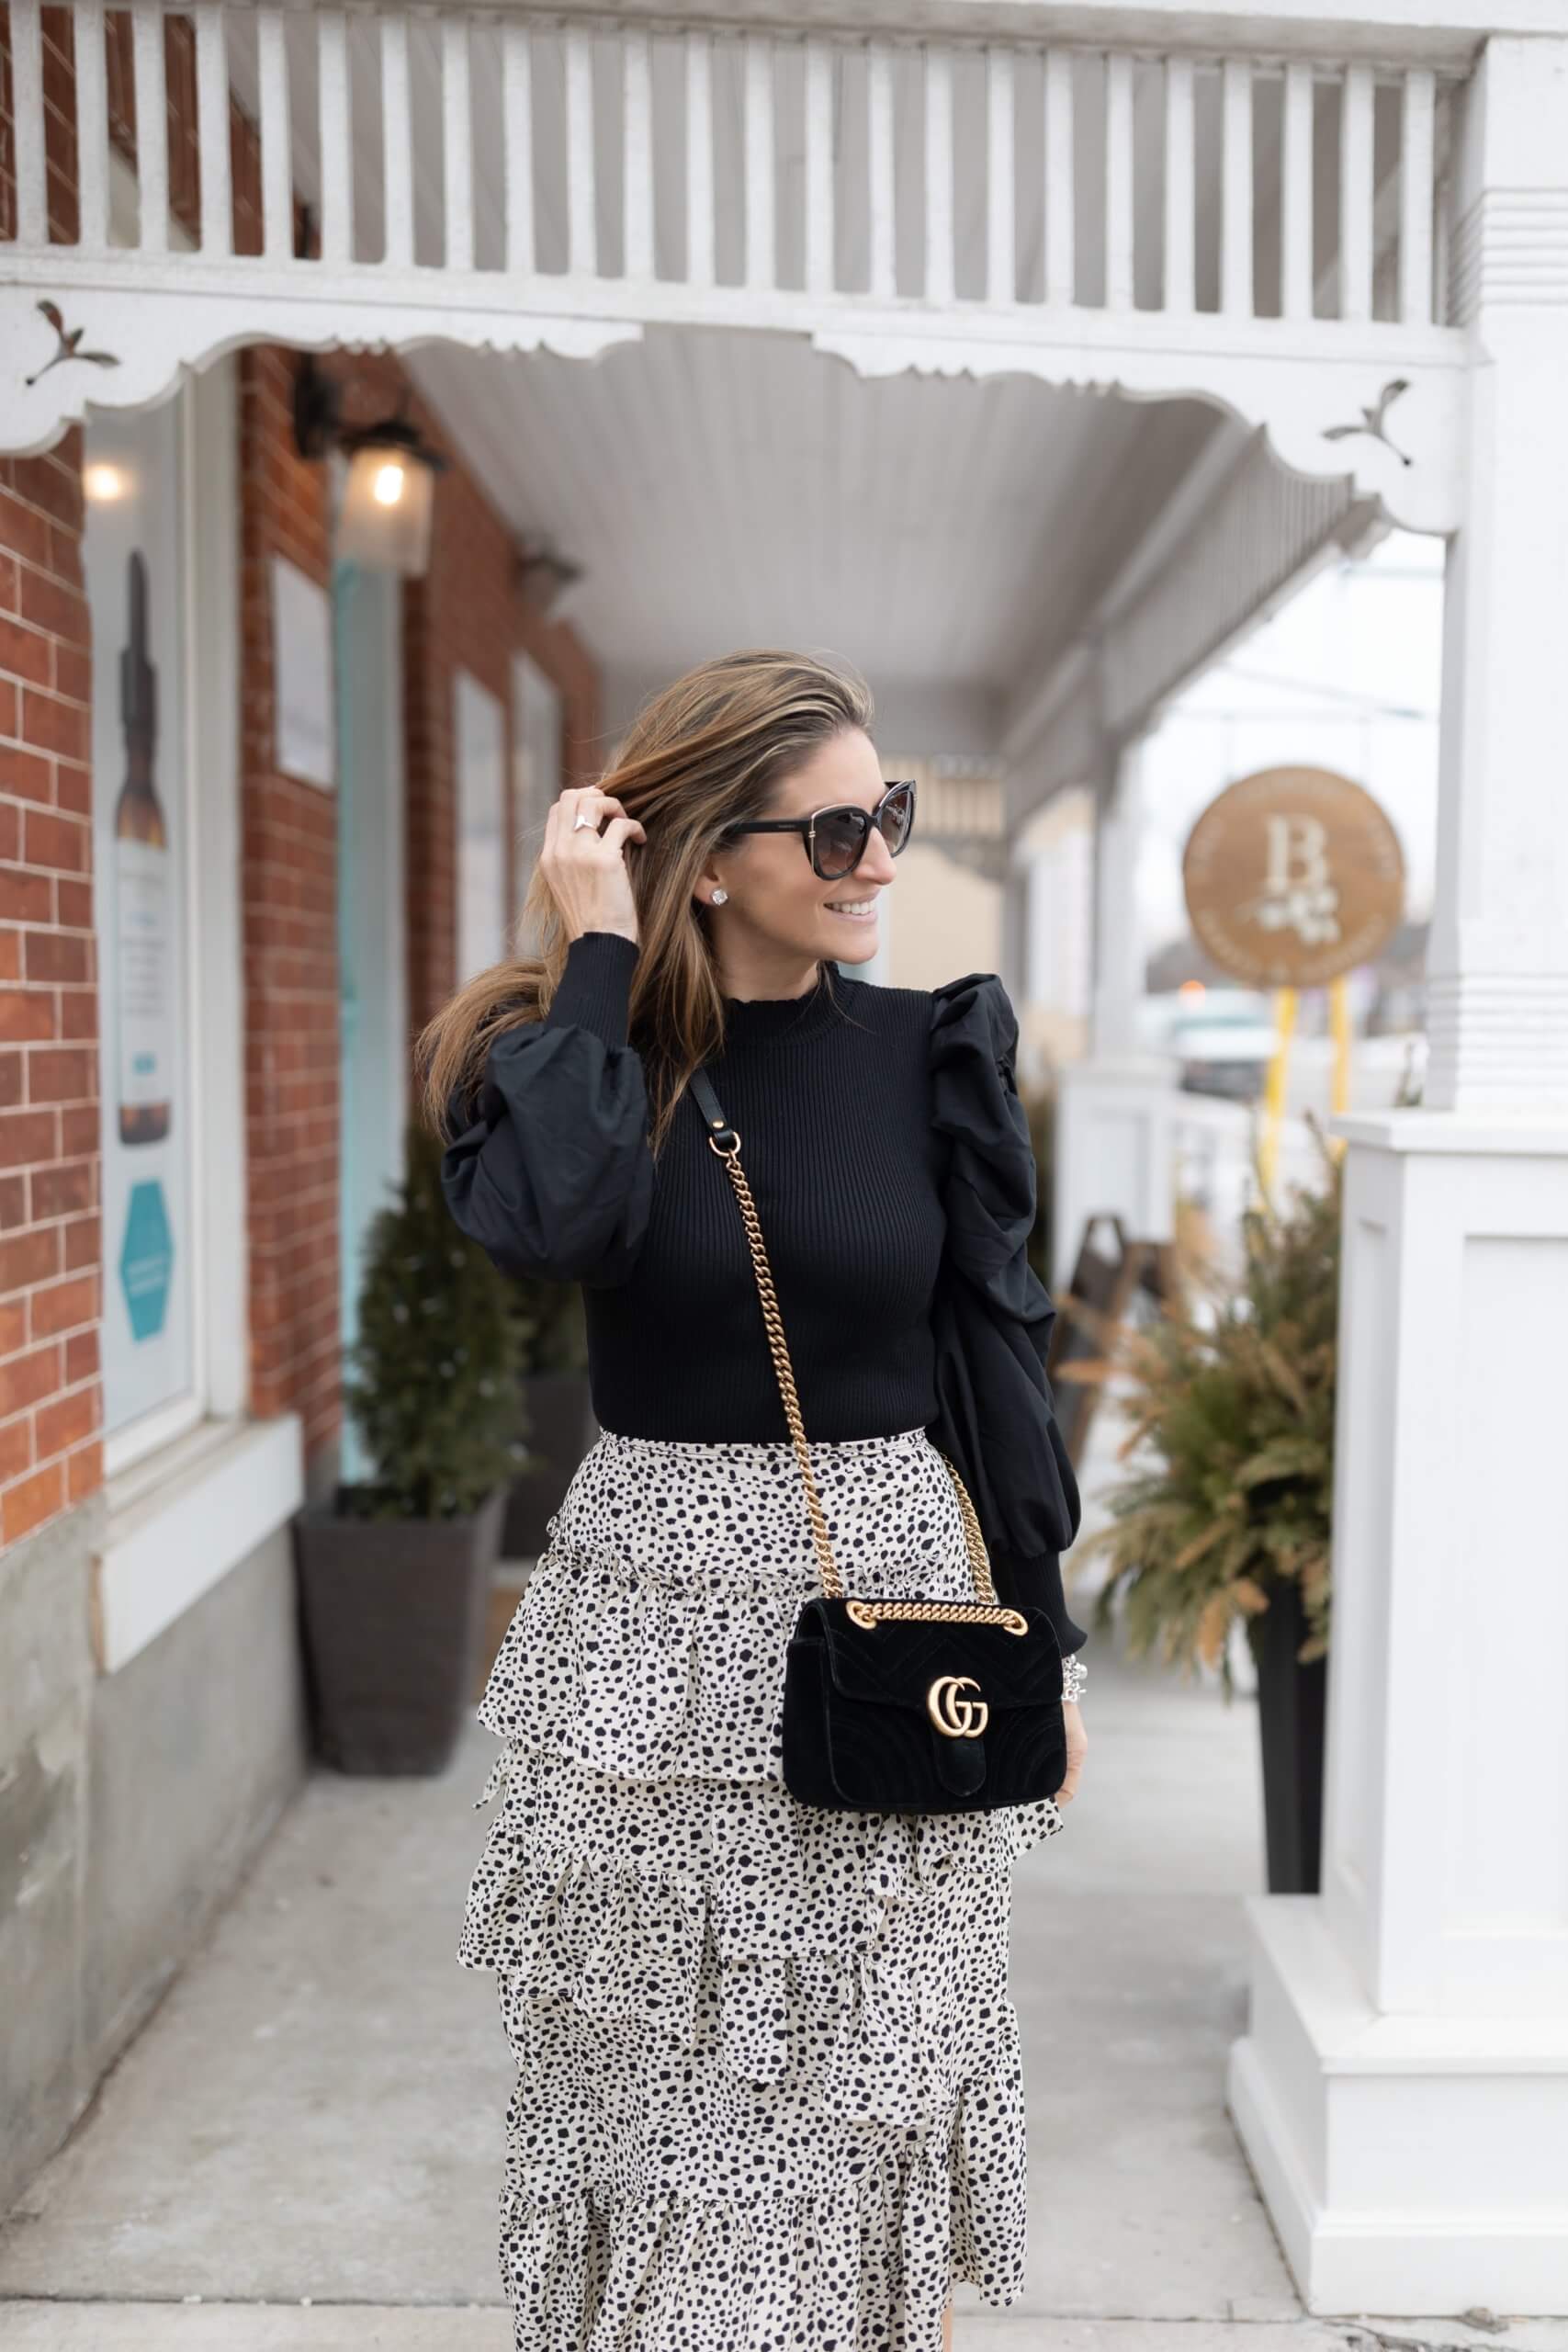 Sweater with fancy puff sleeves, frilly maxi skirt, Gucci suede marmont bag; winter style; sparkleshinylove; sunglasses from Inspired by Rossland Optical